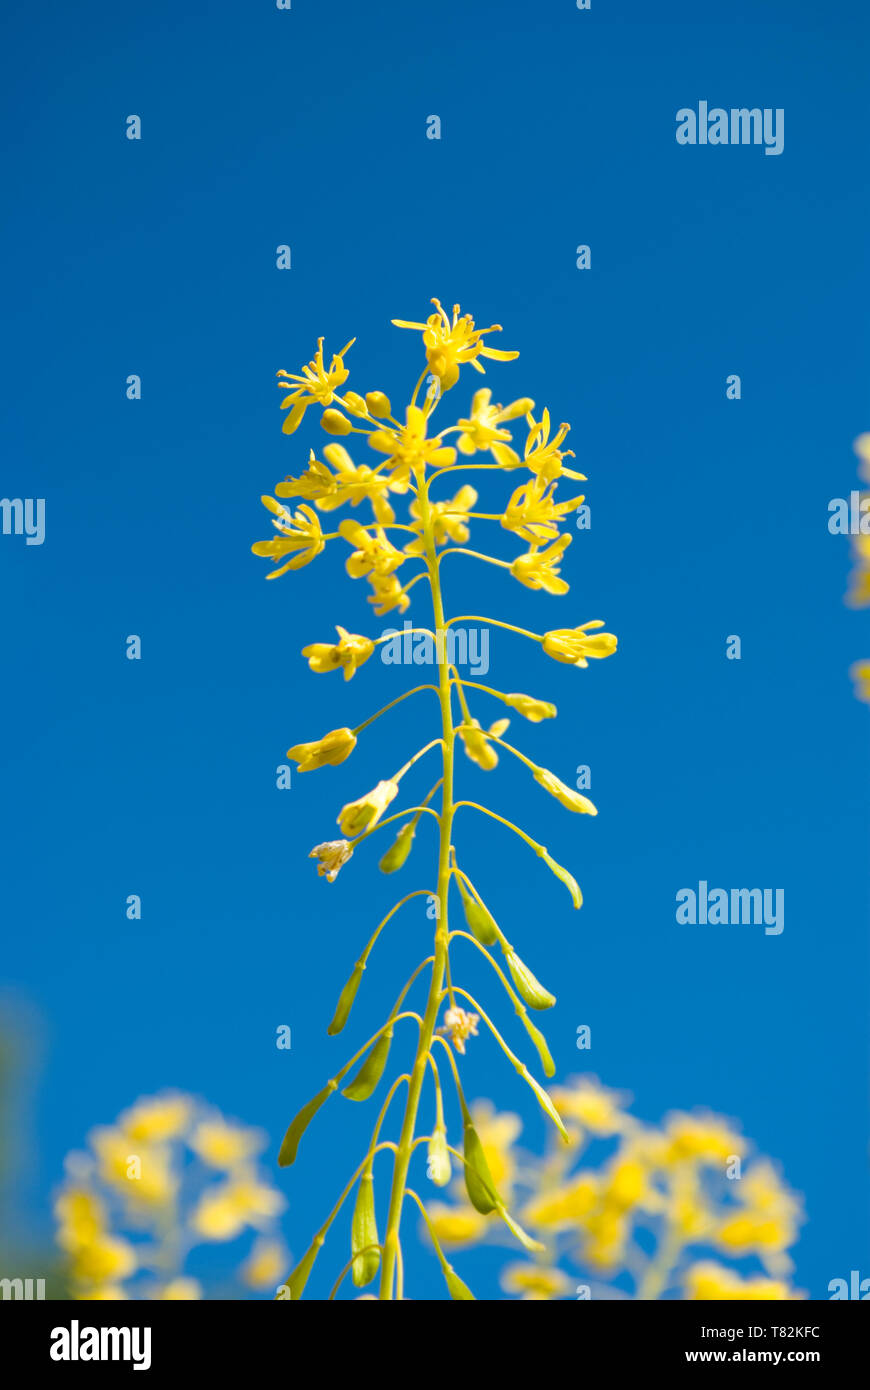 Woad plant against Blue Sky Stock Photo